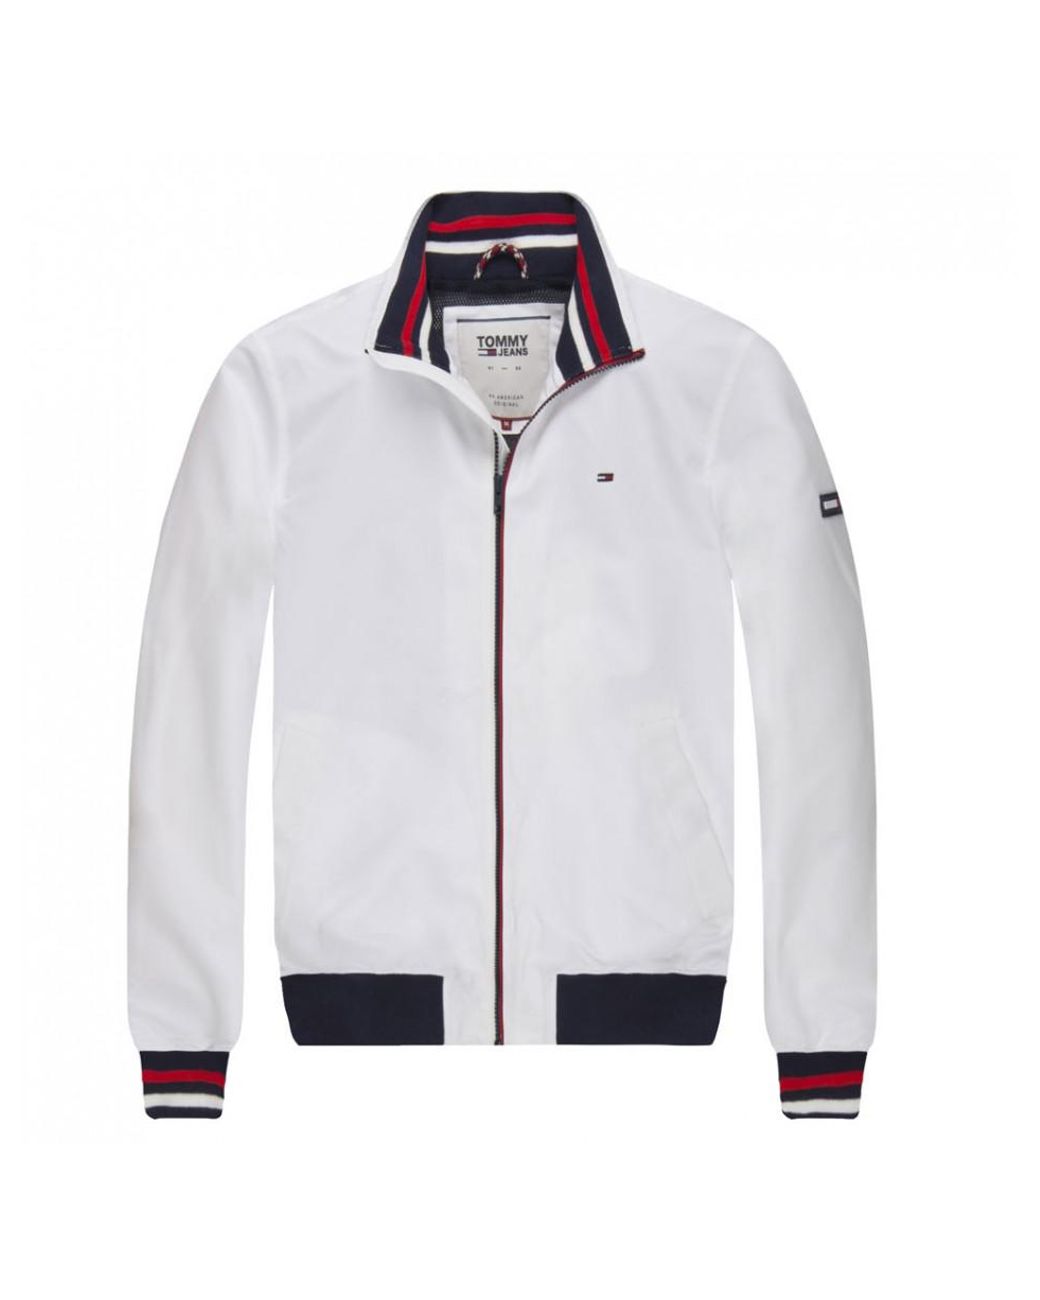 Tommy Hilfiger Denim Tommy Jeans Casual Bomber Jacket in 